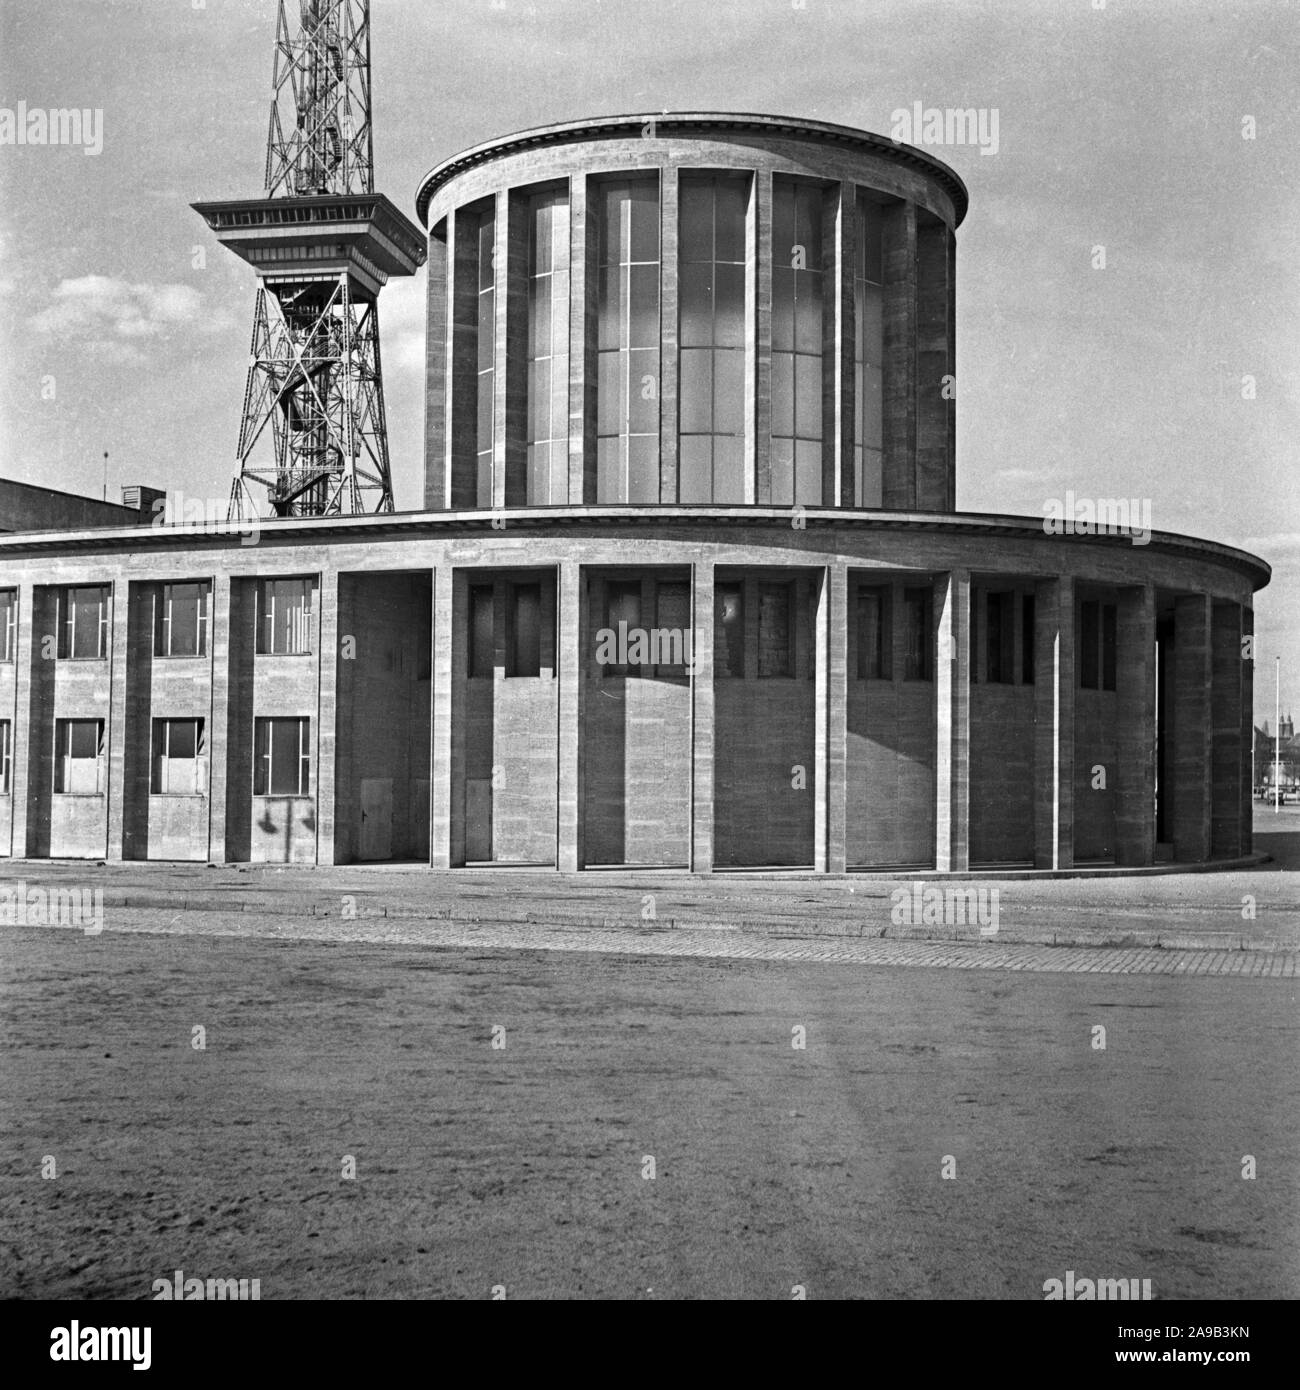 Taking a walk through the capital of the III. Reich, Berlin, here at the Radio Tower in Berlin's Westend, 1940s. Stock Photo